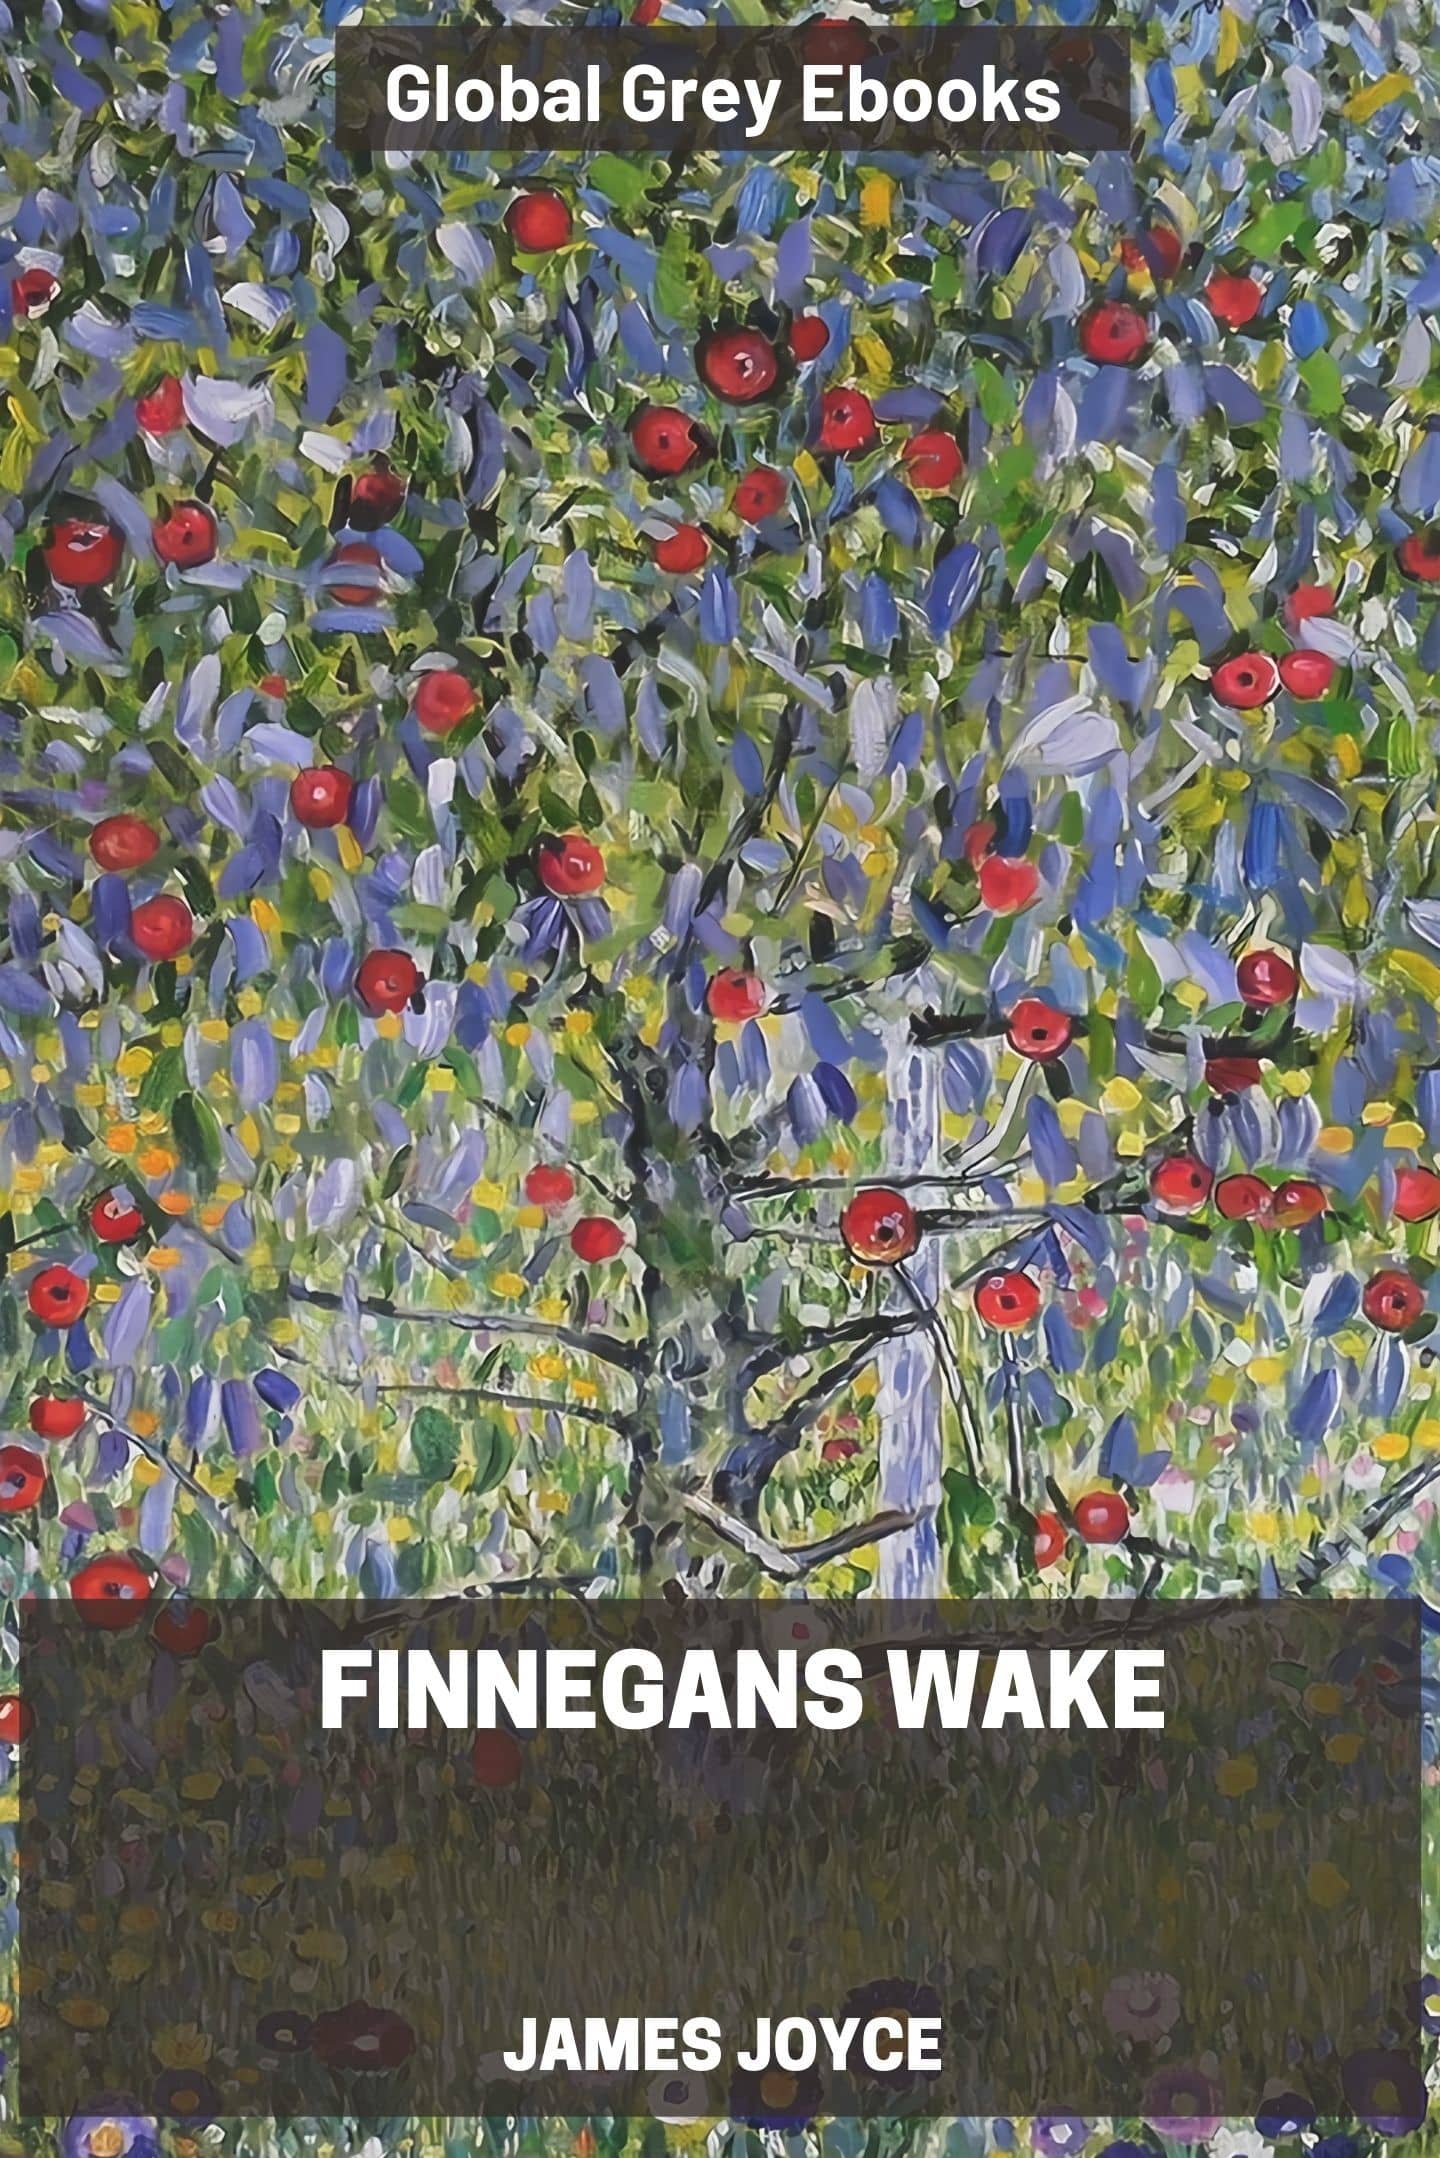 1440px x 2158px - Finnegans Wake, by James Joyce - Complete text online - Global Grey ebooks